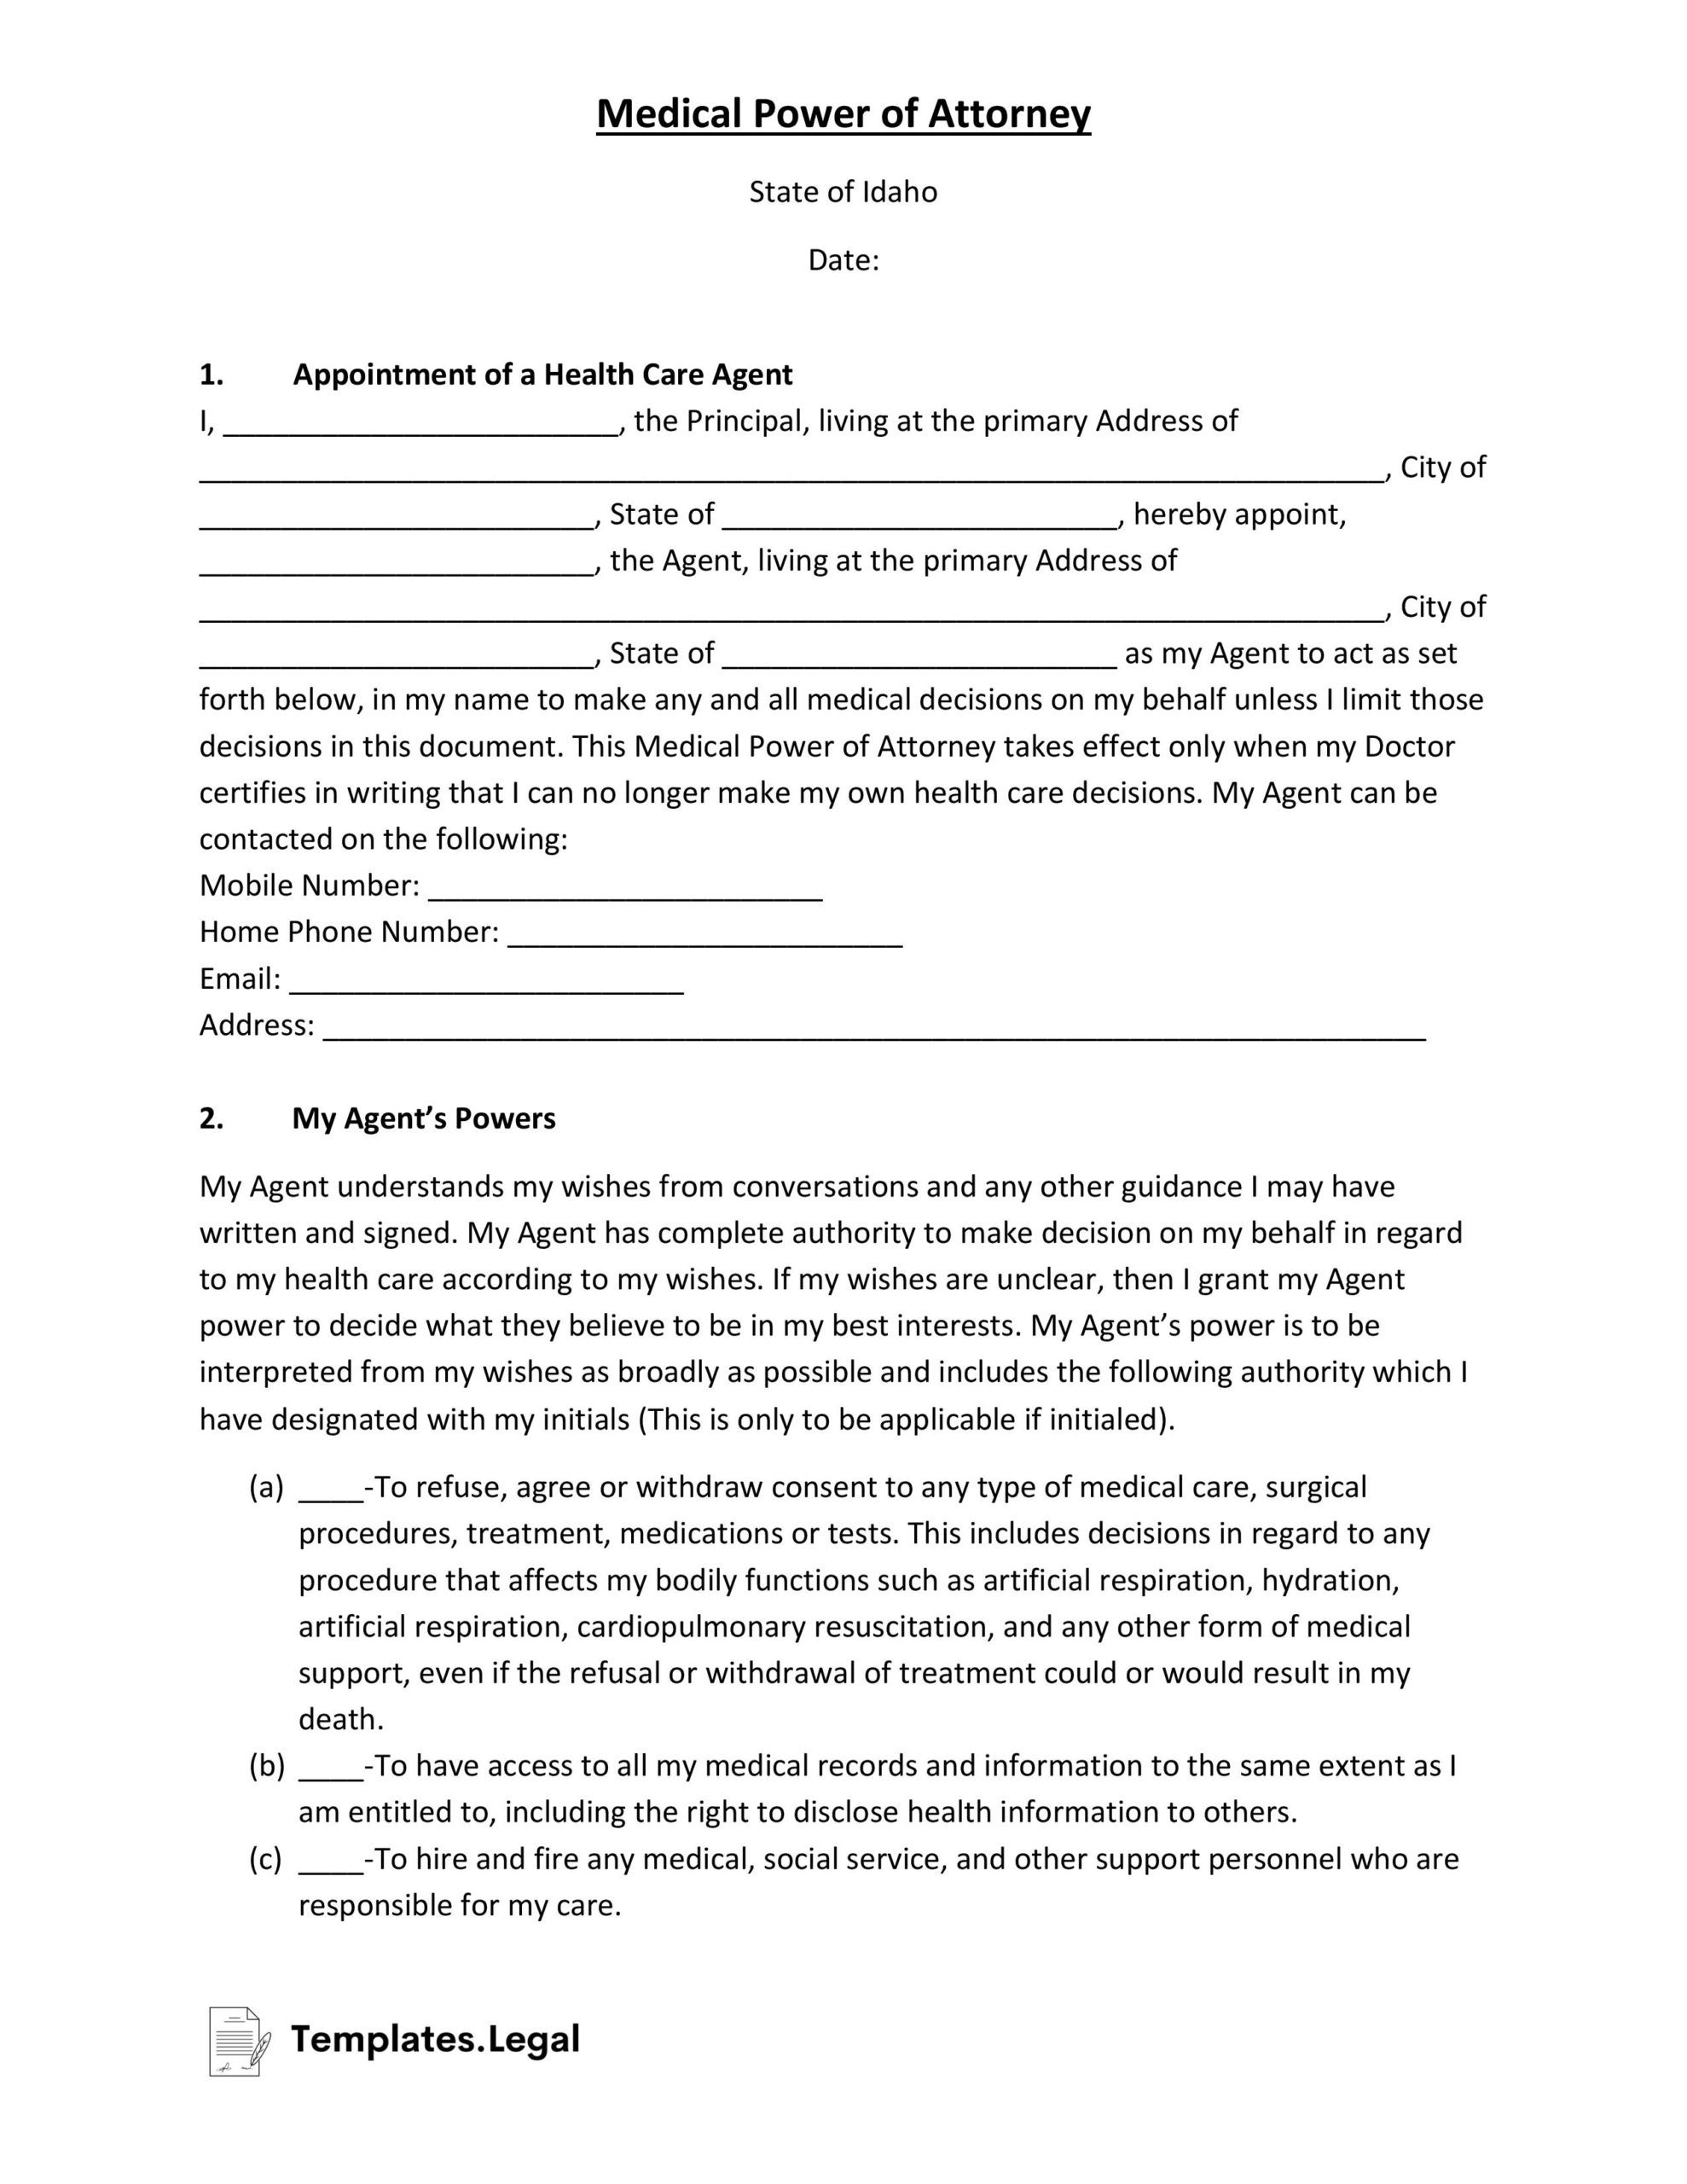 Idaho Medical Power of Attorney- Templates.Legal